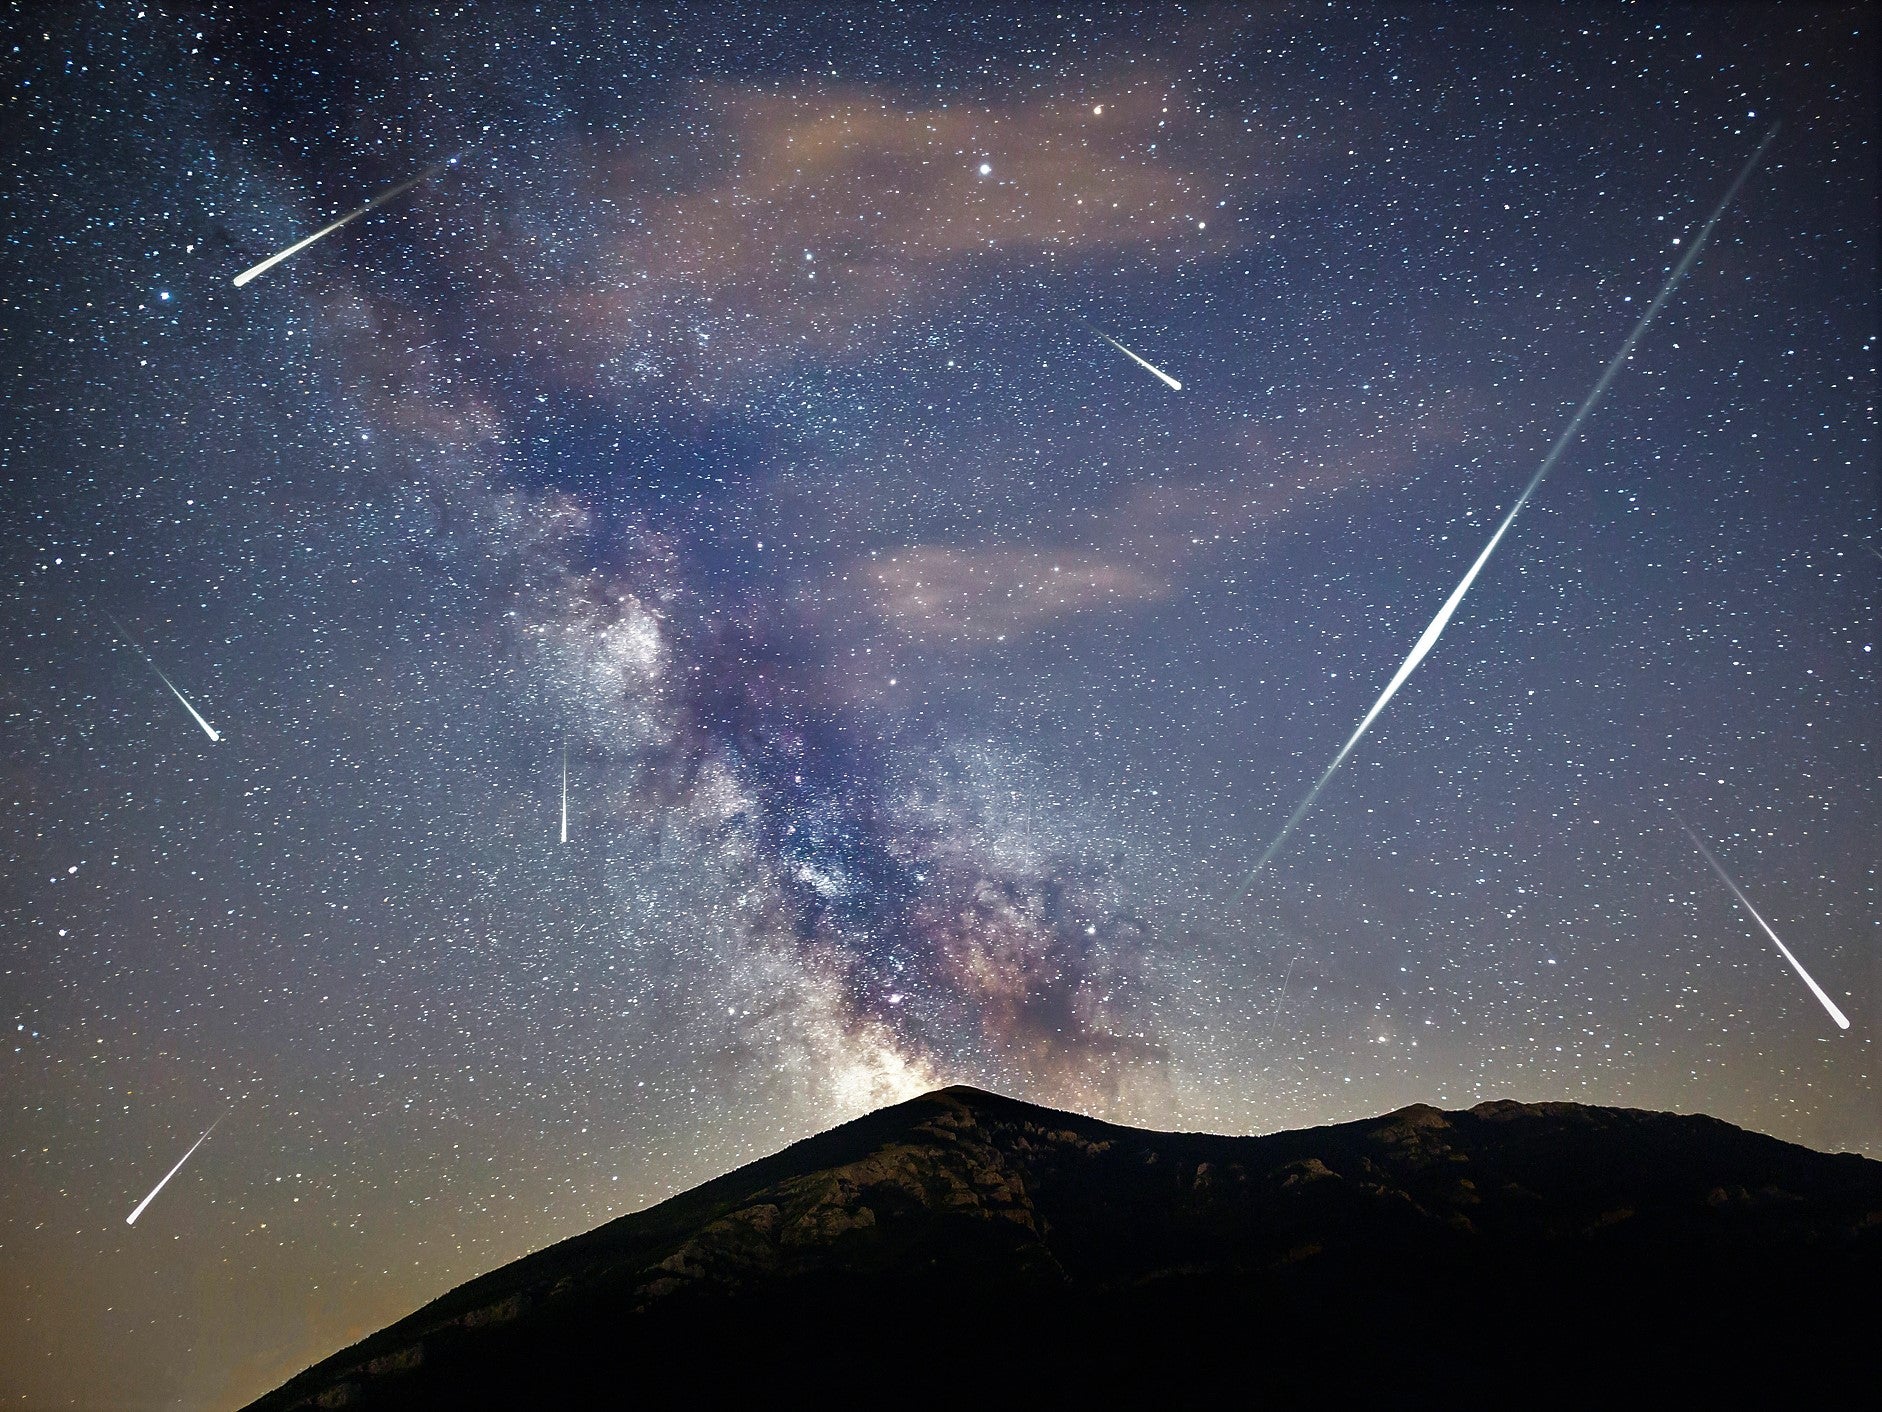 The Geminid meteor shower in 2020 will see more than a hundred meteors shoot across the sky at its peak on 13 December